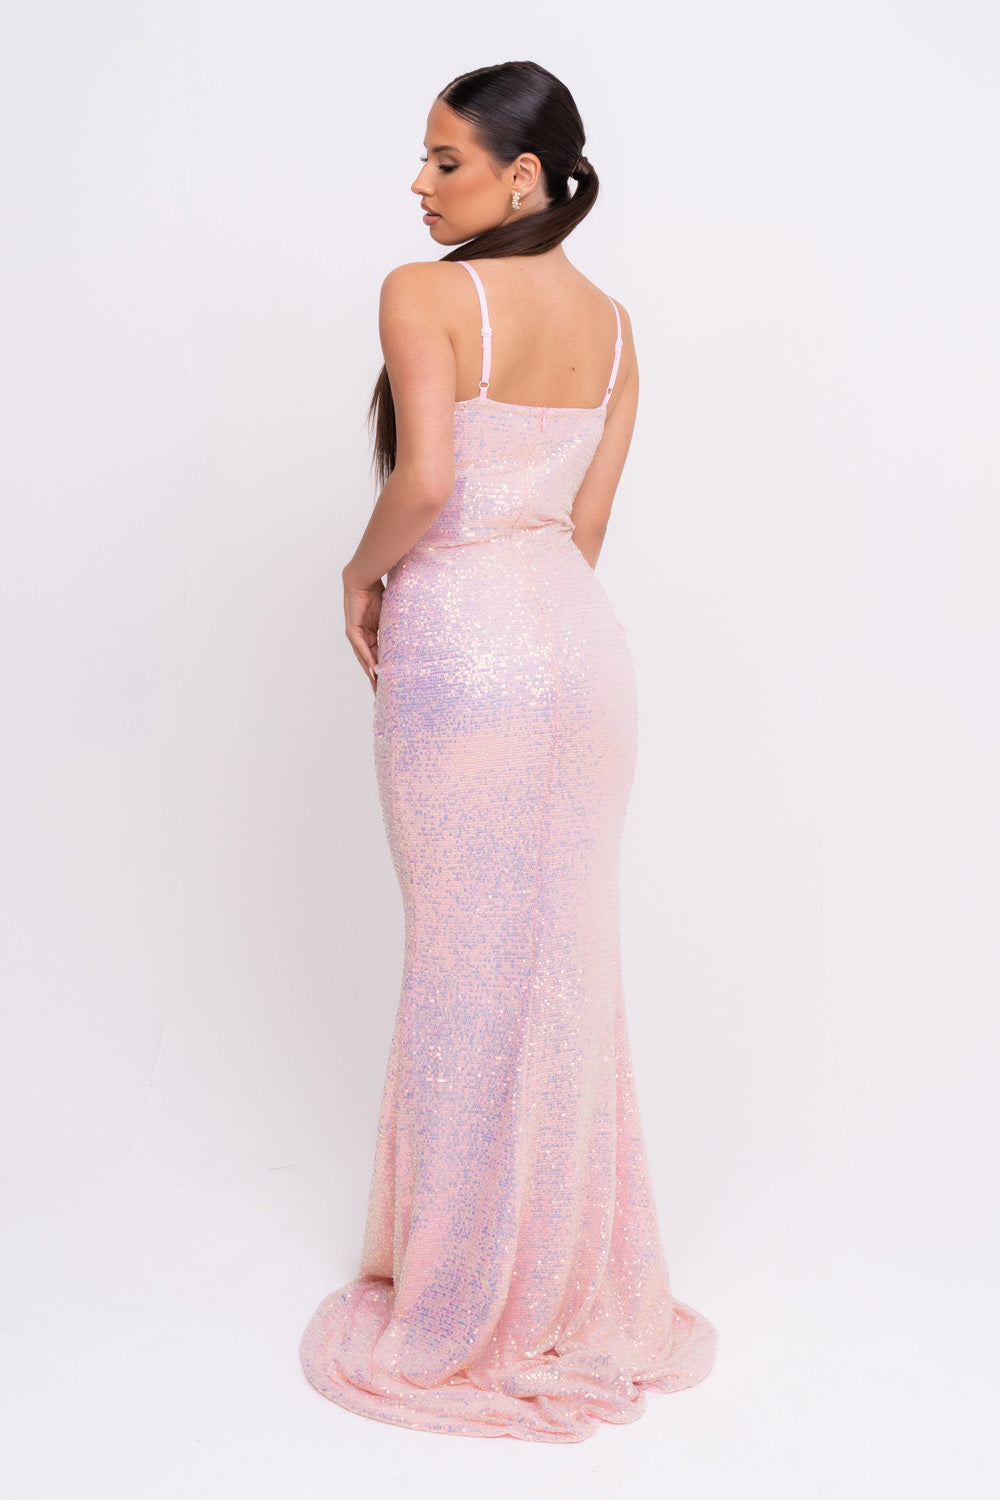 Magestic Premium Blush Pink Holographic Strappy Ruched Drawstring Slit Plunge Sequin Maxi Dress